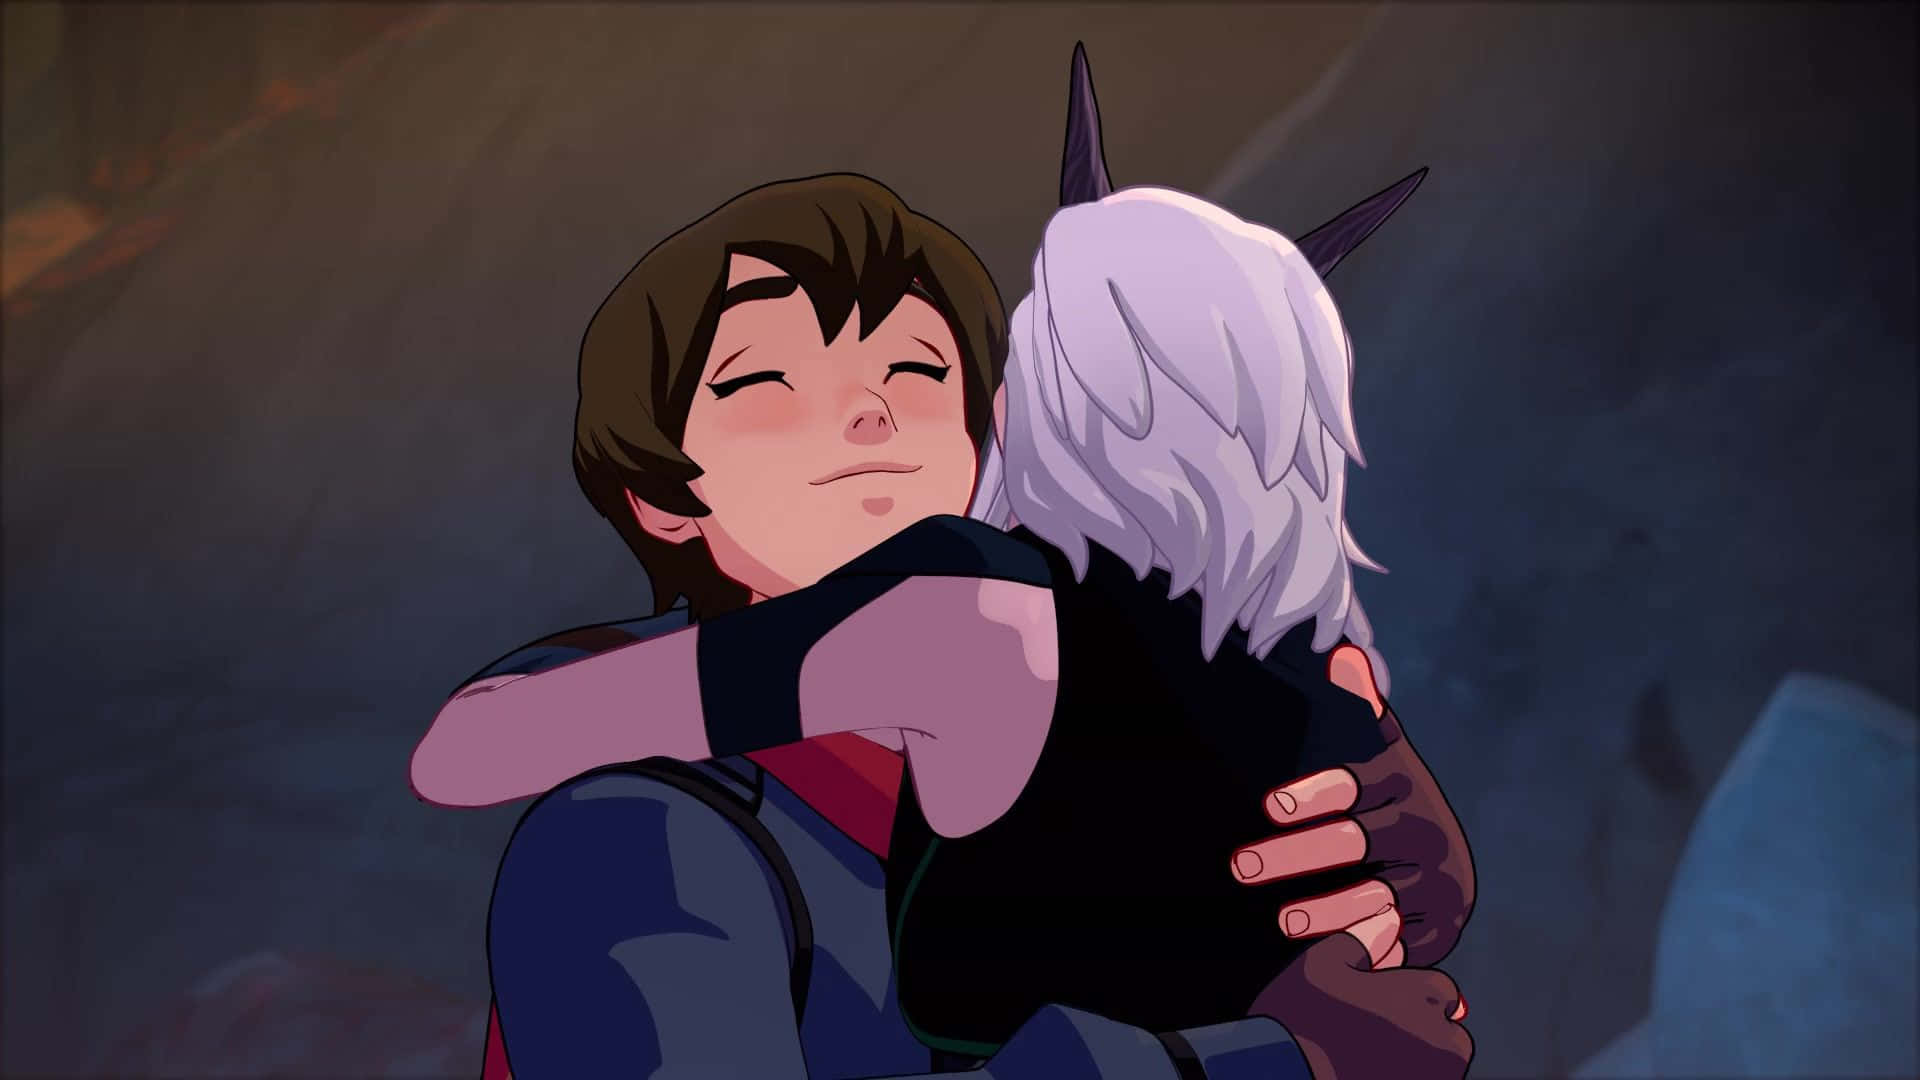 Follow the story of Callum, Rayla and Ezran in The Dragon Prince Wallpaper